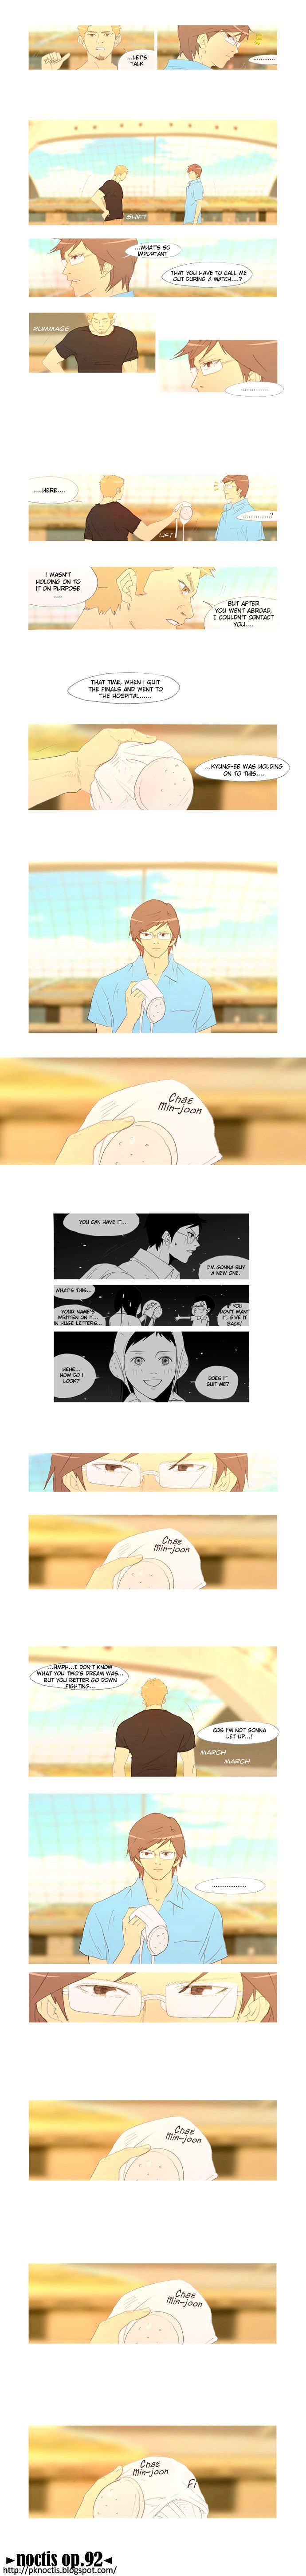 My Heart Is Beating - Page 2